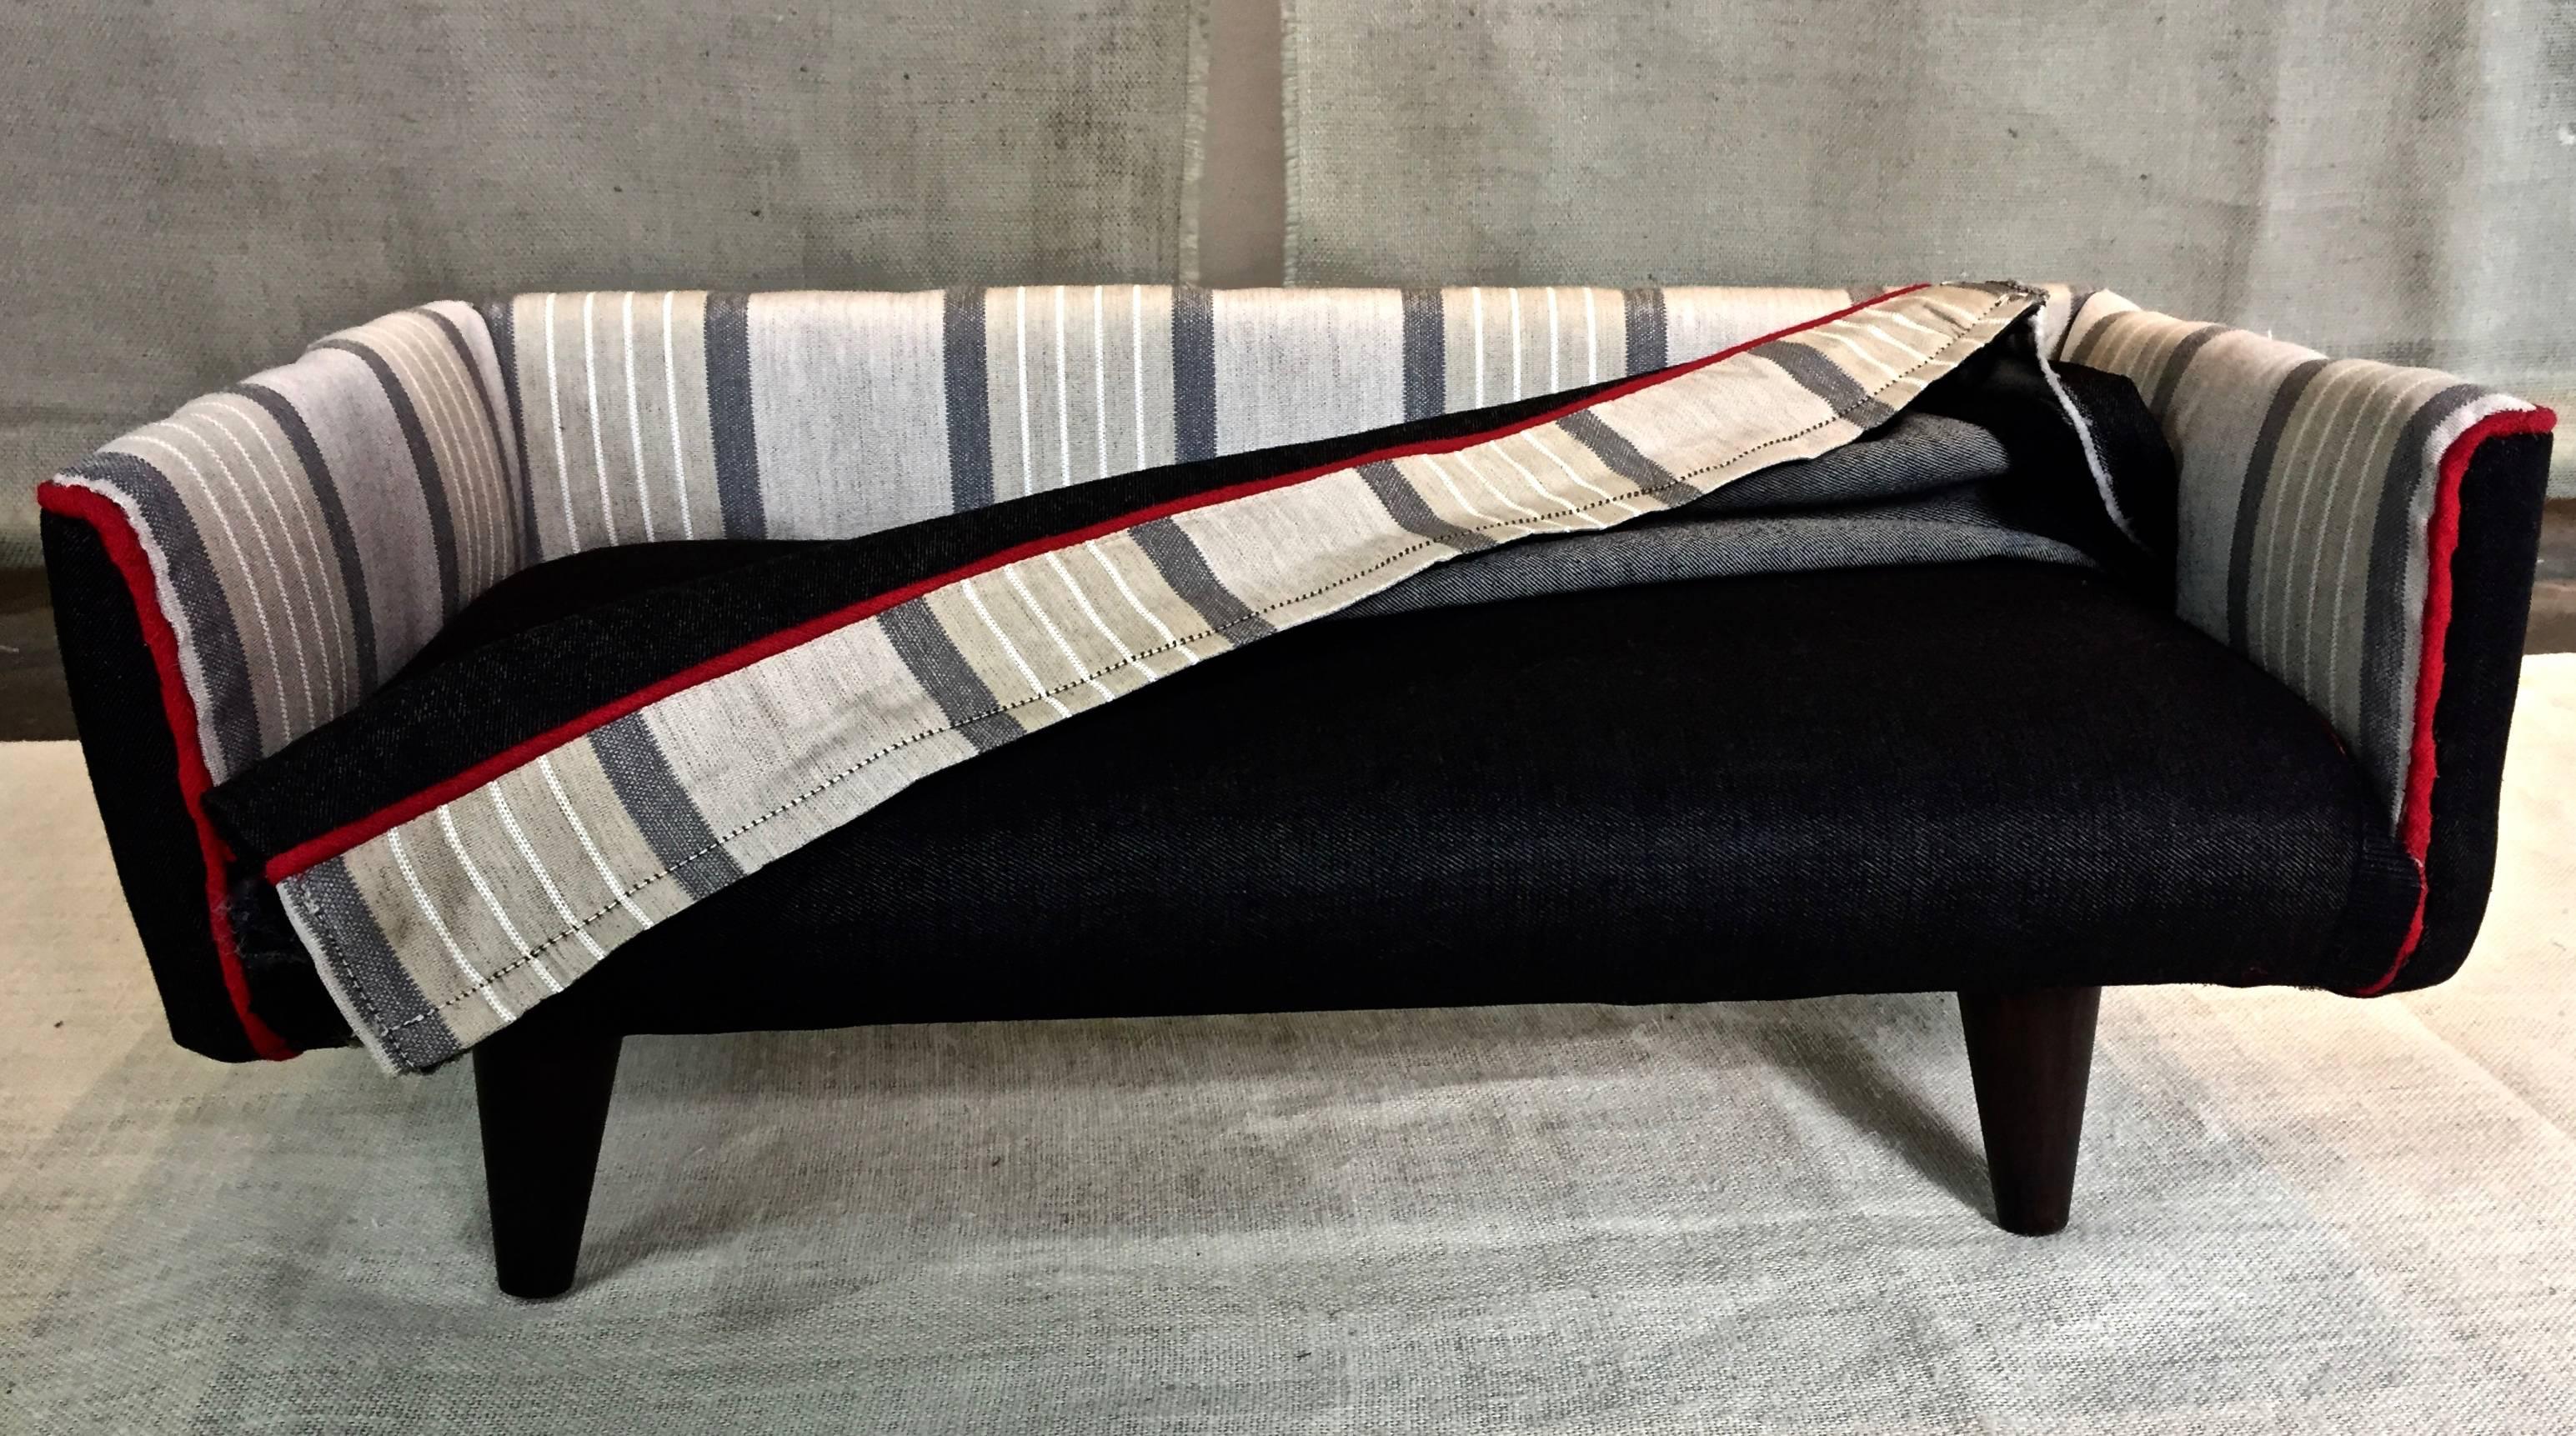 American Black Denim and Stripe Midcentury Dogbed For Sale